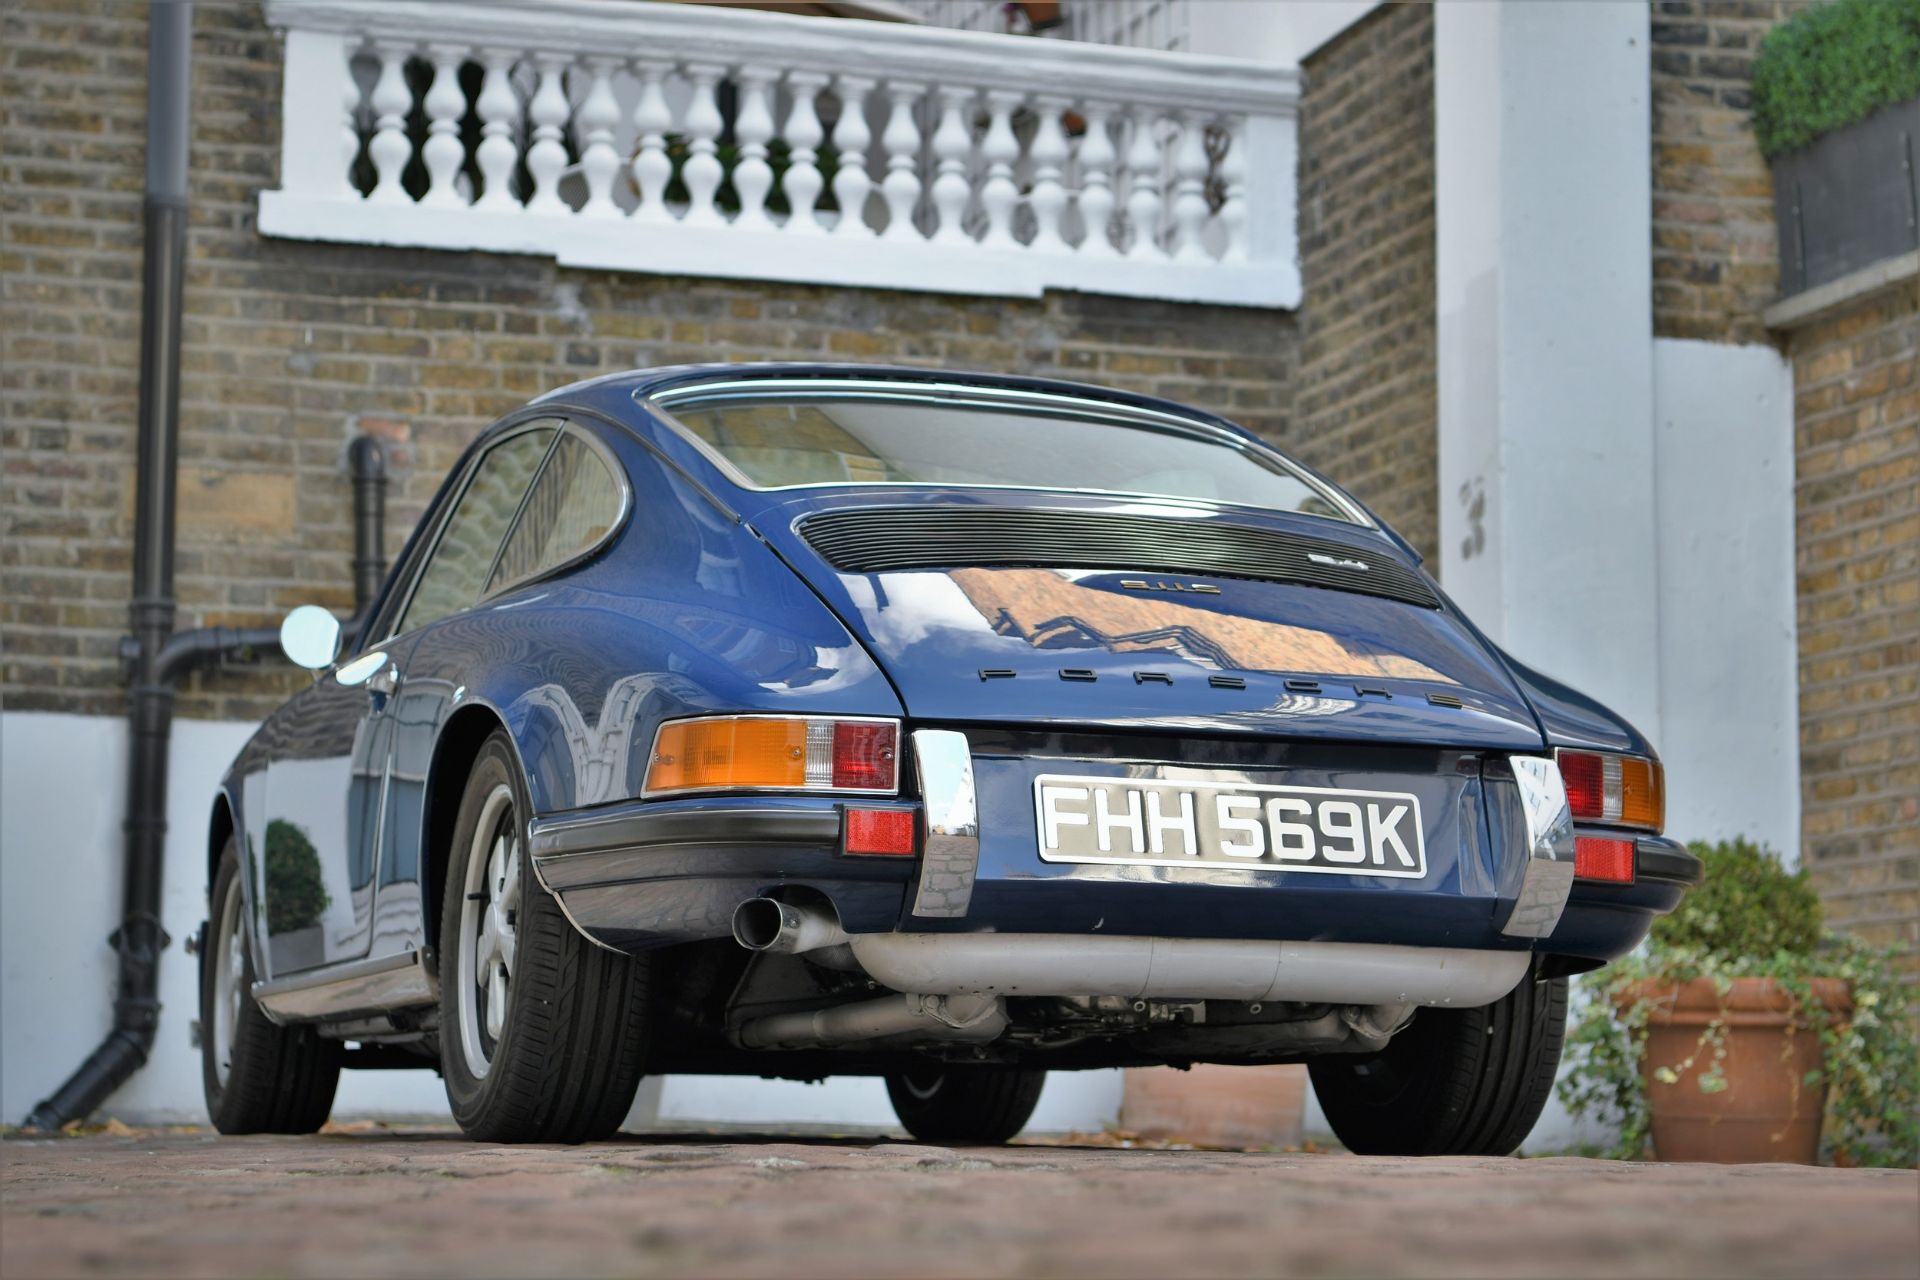 1972 PORSCHE 911 2.4 'S' 'OELKLAPPE COUPE' Registration Number : FHH 569K Chassis Number : - Image 6 of 28